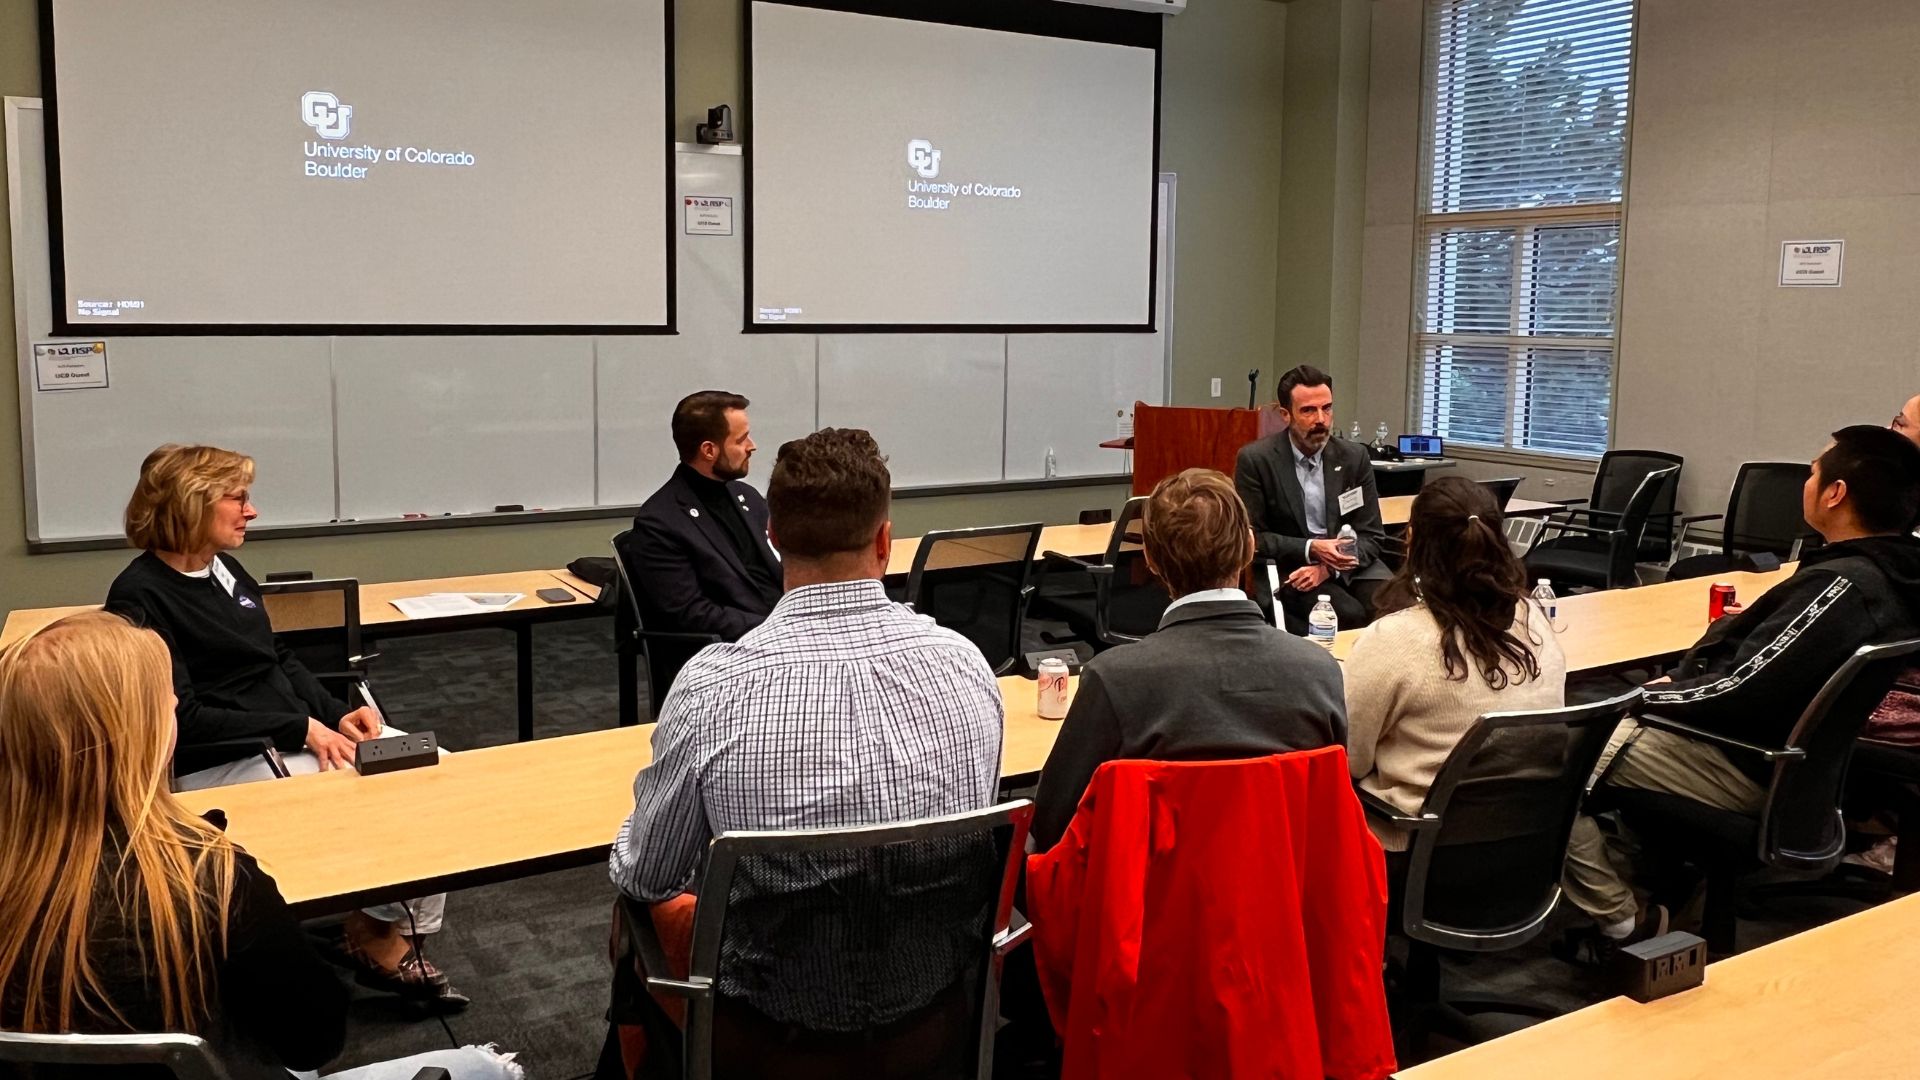 Leaders from NASA's Heliophysics Division, including Deputy Director Peg Luce (left), Director Joe Westlake (middle), and Space Weather Director Jamie Favors, met with LASP graduate students and early career researchers. Credit: LASP